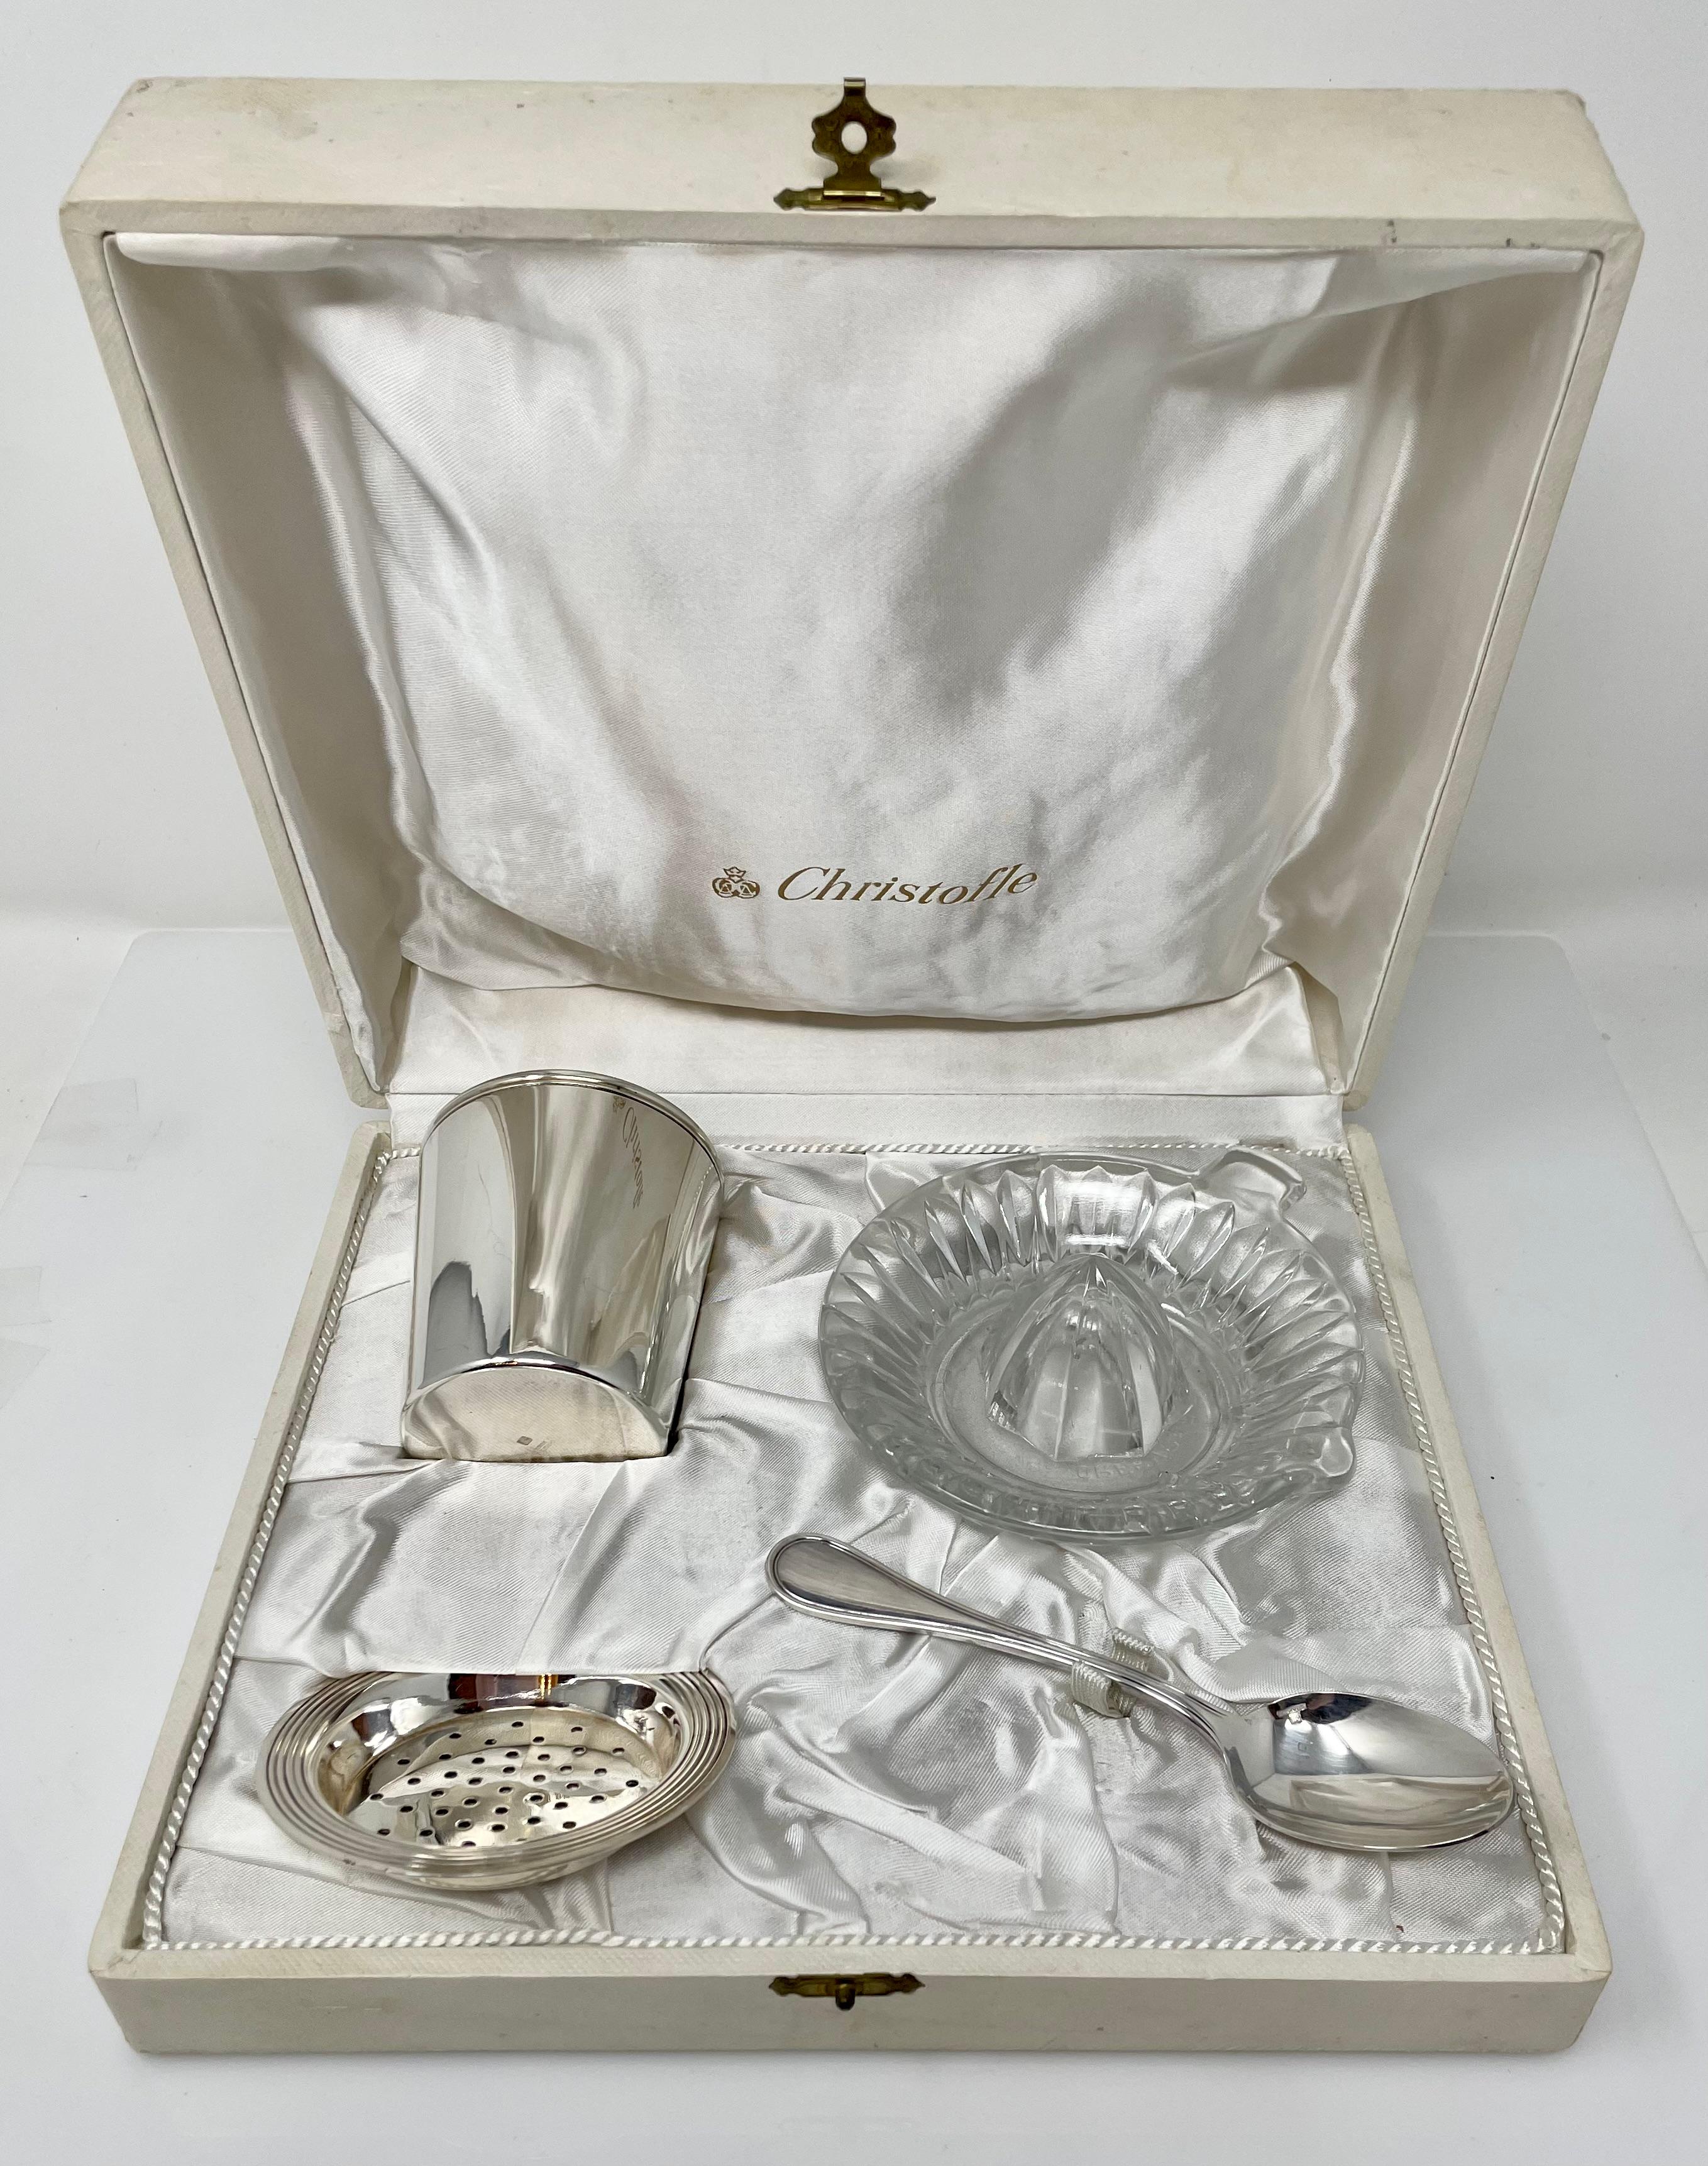 Estate French Christofle crystal and silver plate juice set in original fitted box, circa 1940-1950. Hallmarked on bottom of cup.